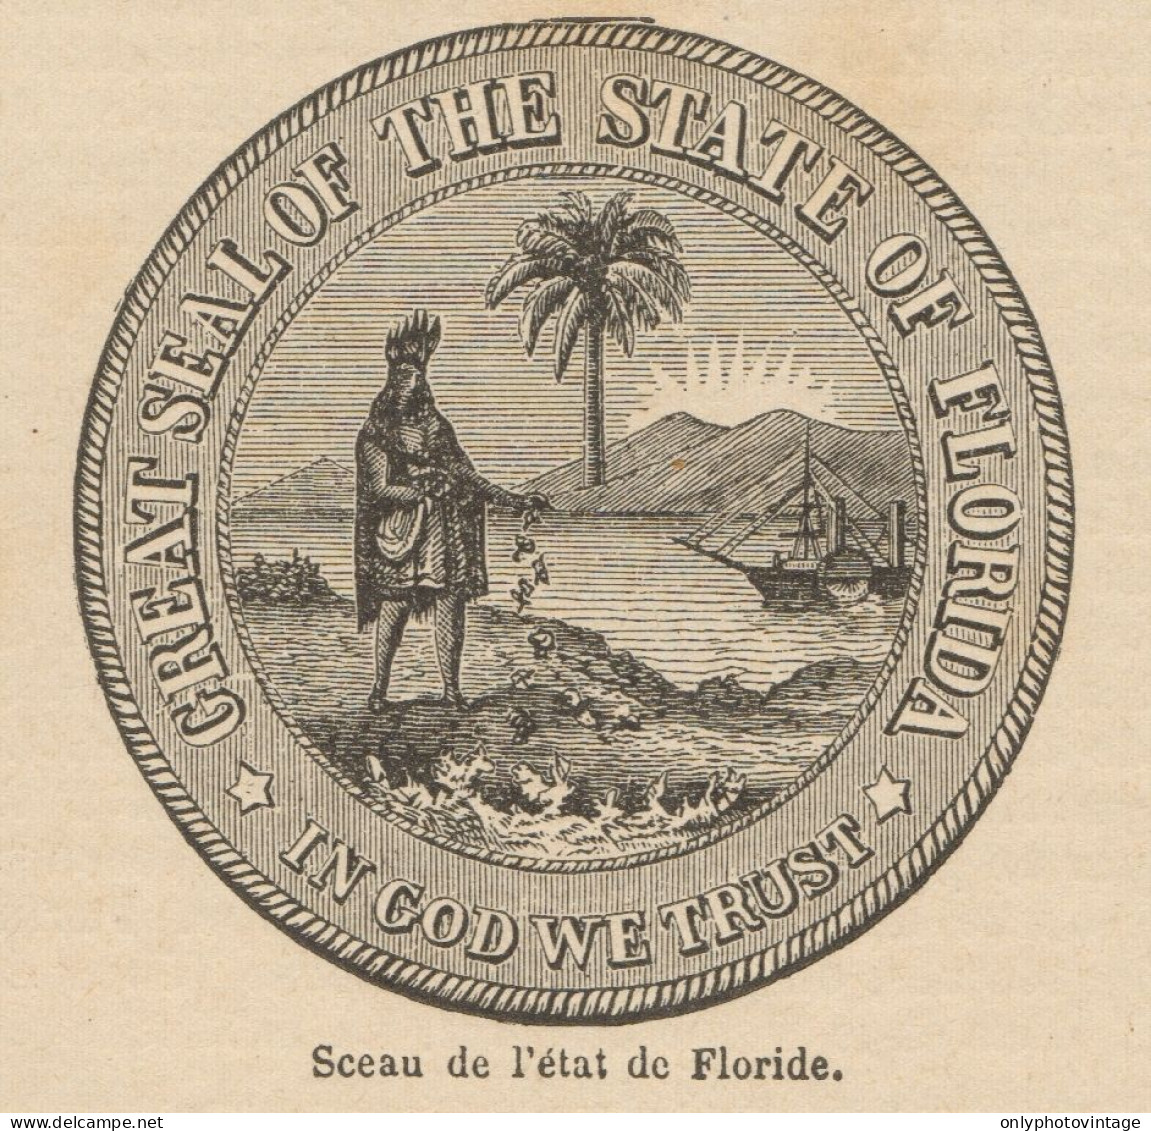 Seal Of The State Of Florida - Stampa Antica - 1892 Engraving - Stiche & Gravuren